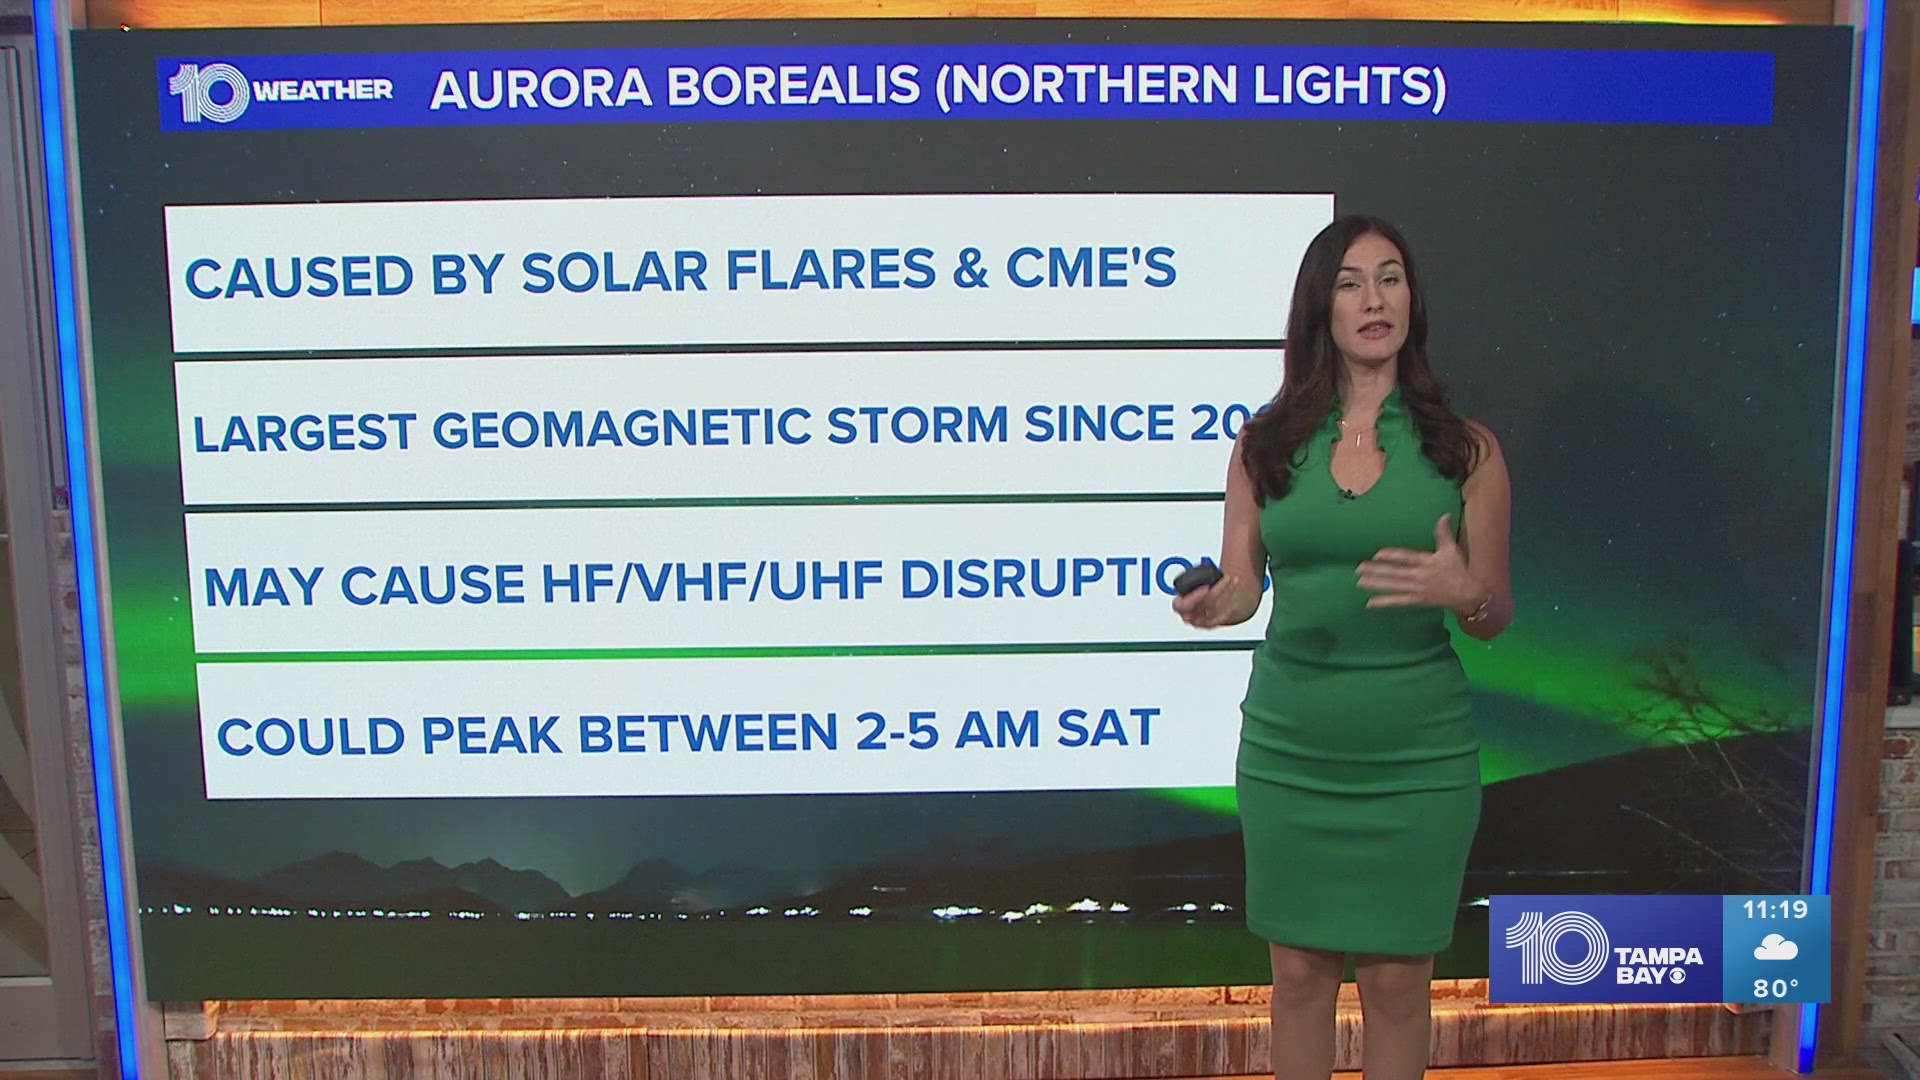 A large portion of the U.S. will likely see increased Northern Lights activity Friday night and throughout the weekend. But what about Florida?